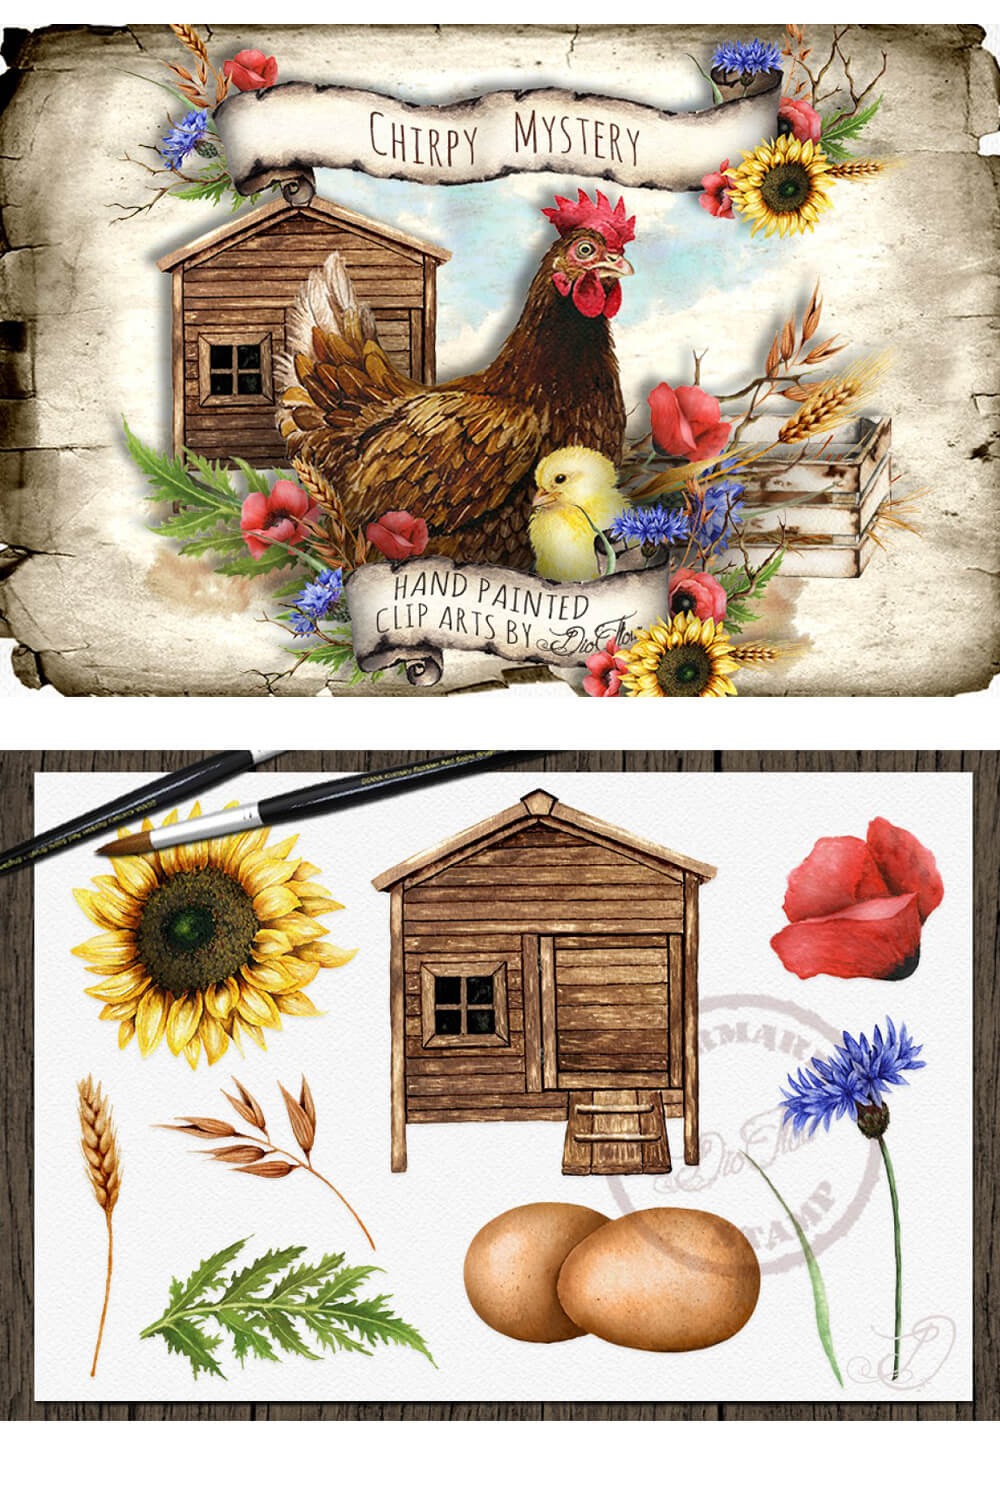 Illustrations of a chicken with chickens on the farm, picture for pinterest.